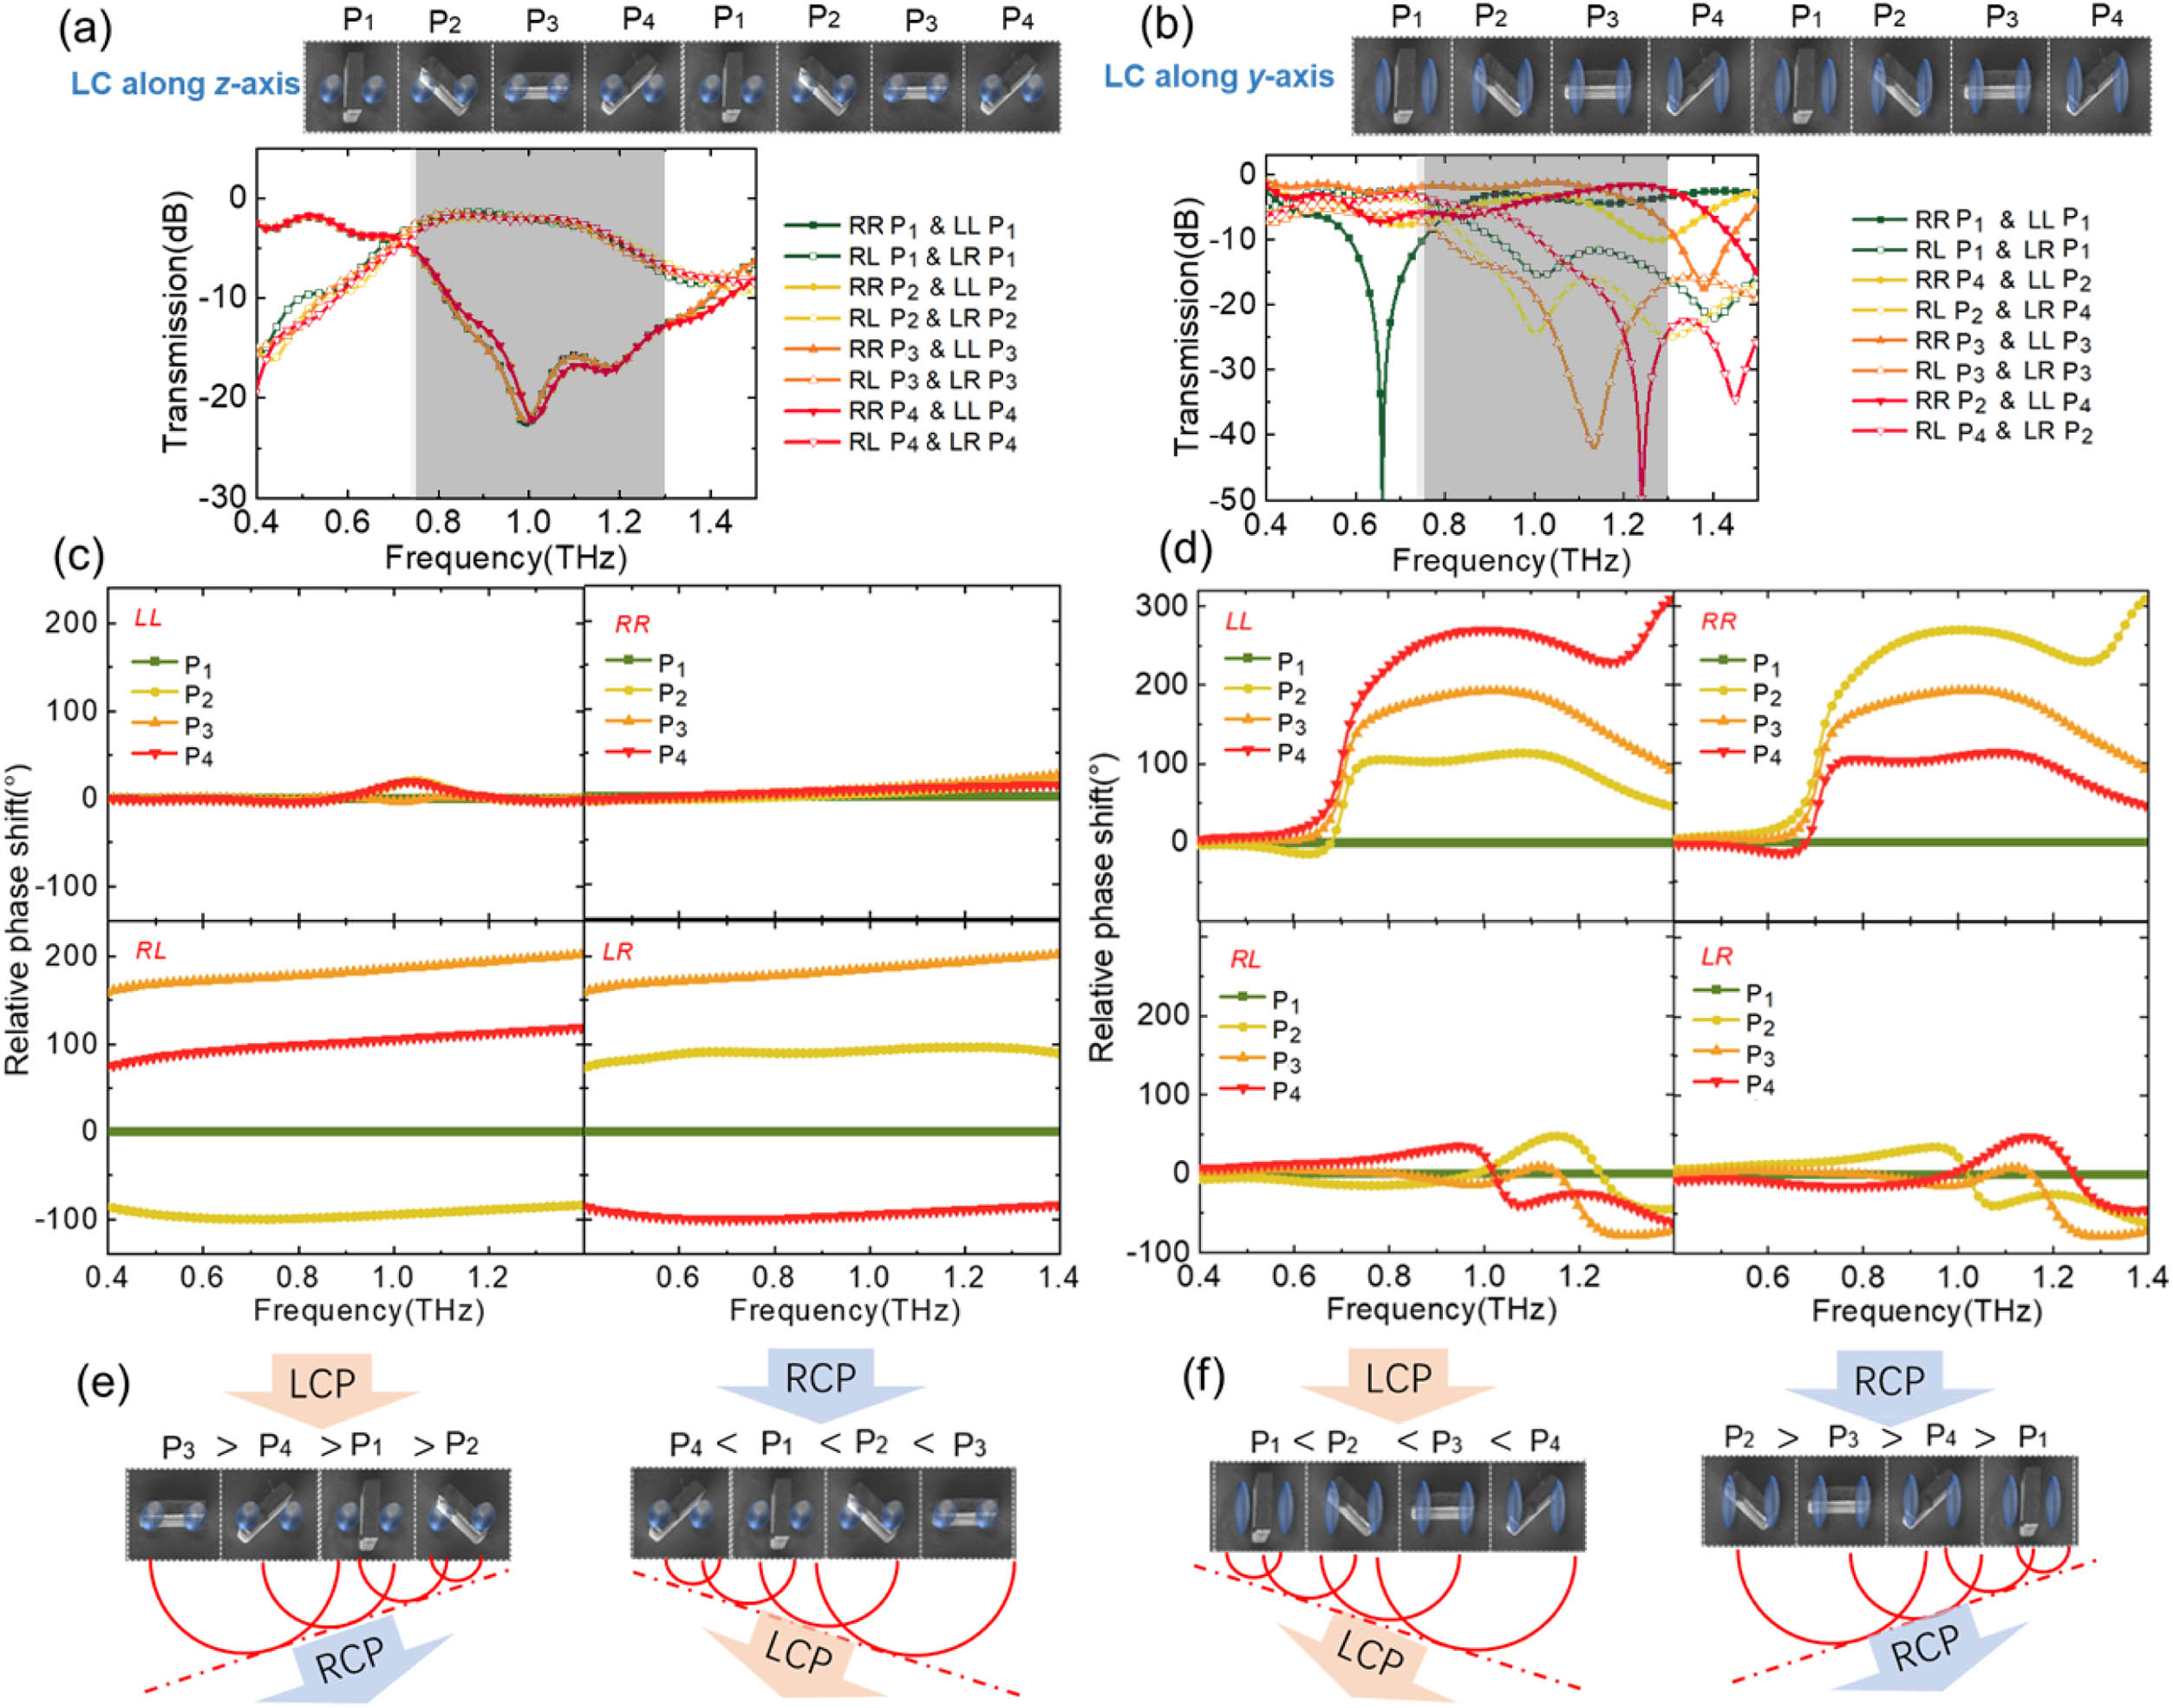 Simulative transmission spectra of the four spin states (LL, RL, RR, and LR) for four meta-atoms (P1, P2, P3, and P4) with different orientations of LC molecules: (a) along the z axis and (b) y axis. The inset shows the structures of the LC-PB meta-atom in two cycles of the period. Corresponding relative phase shift spectra: (c) LC molecules along the z axis and (d) y axis. Schematic diagram of the corresponding phase gradient relation, spin states, and deflection direction of the incident wave and outgoing wave with the orientation of LC along the (e) z axis and (f) y axis.